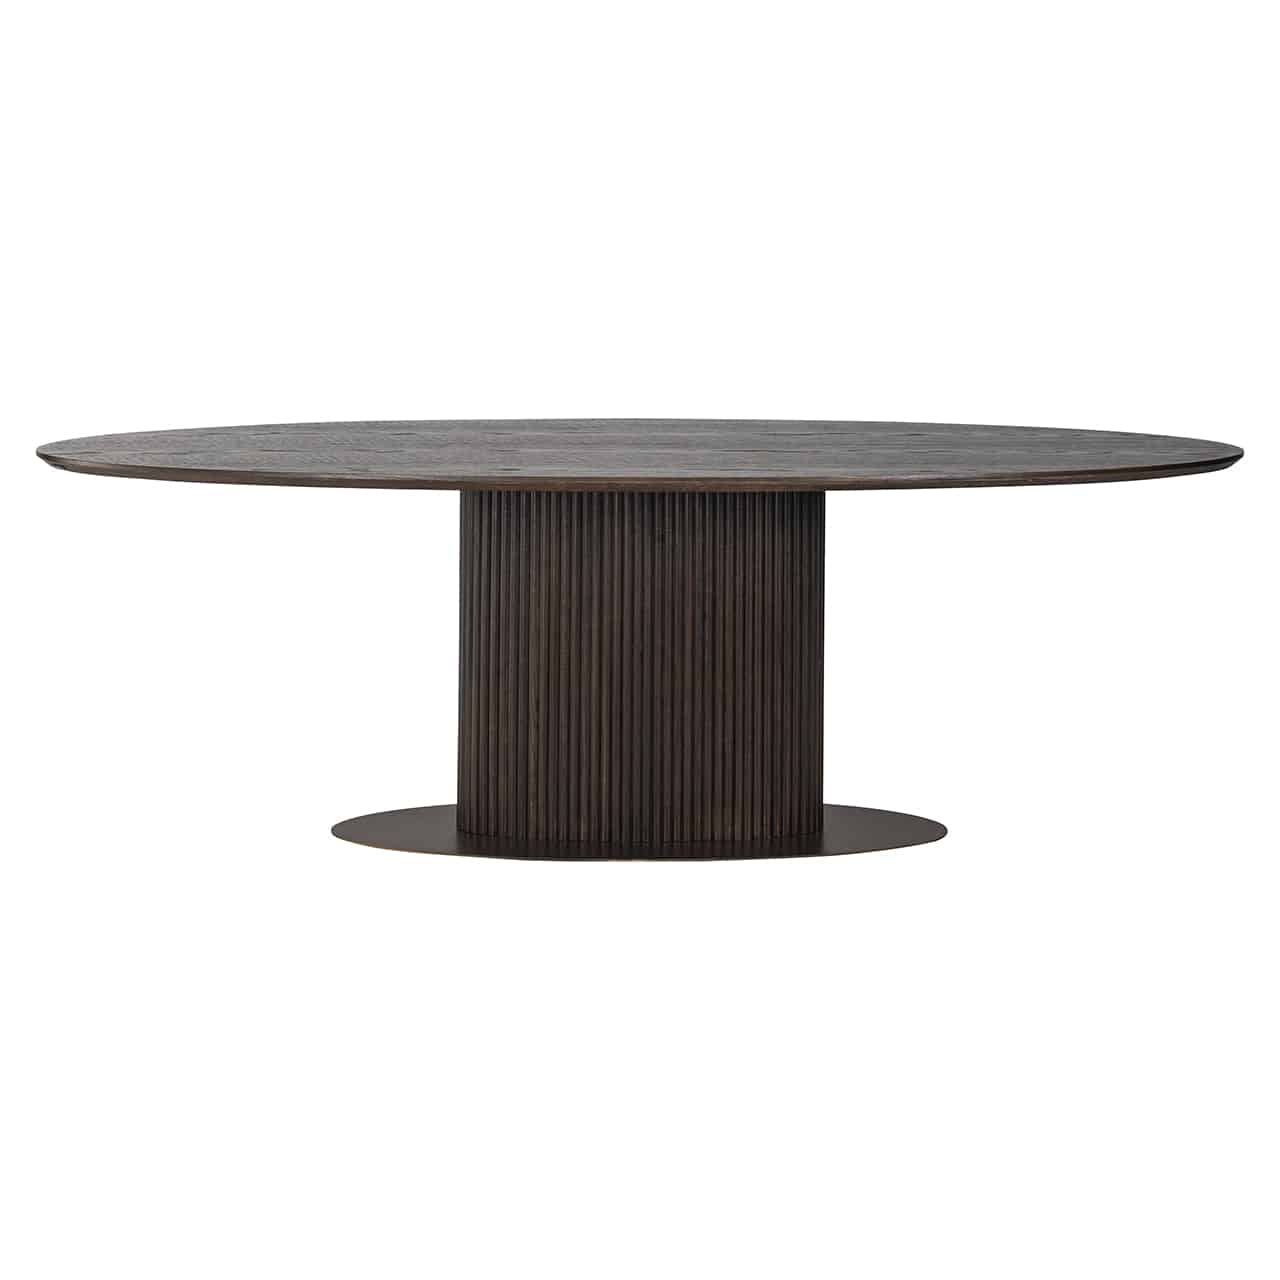 Dining table Luxor oval 2357755richmond